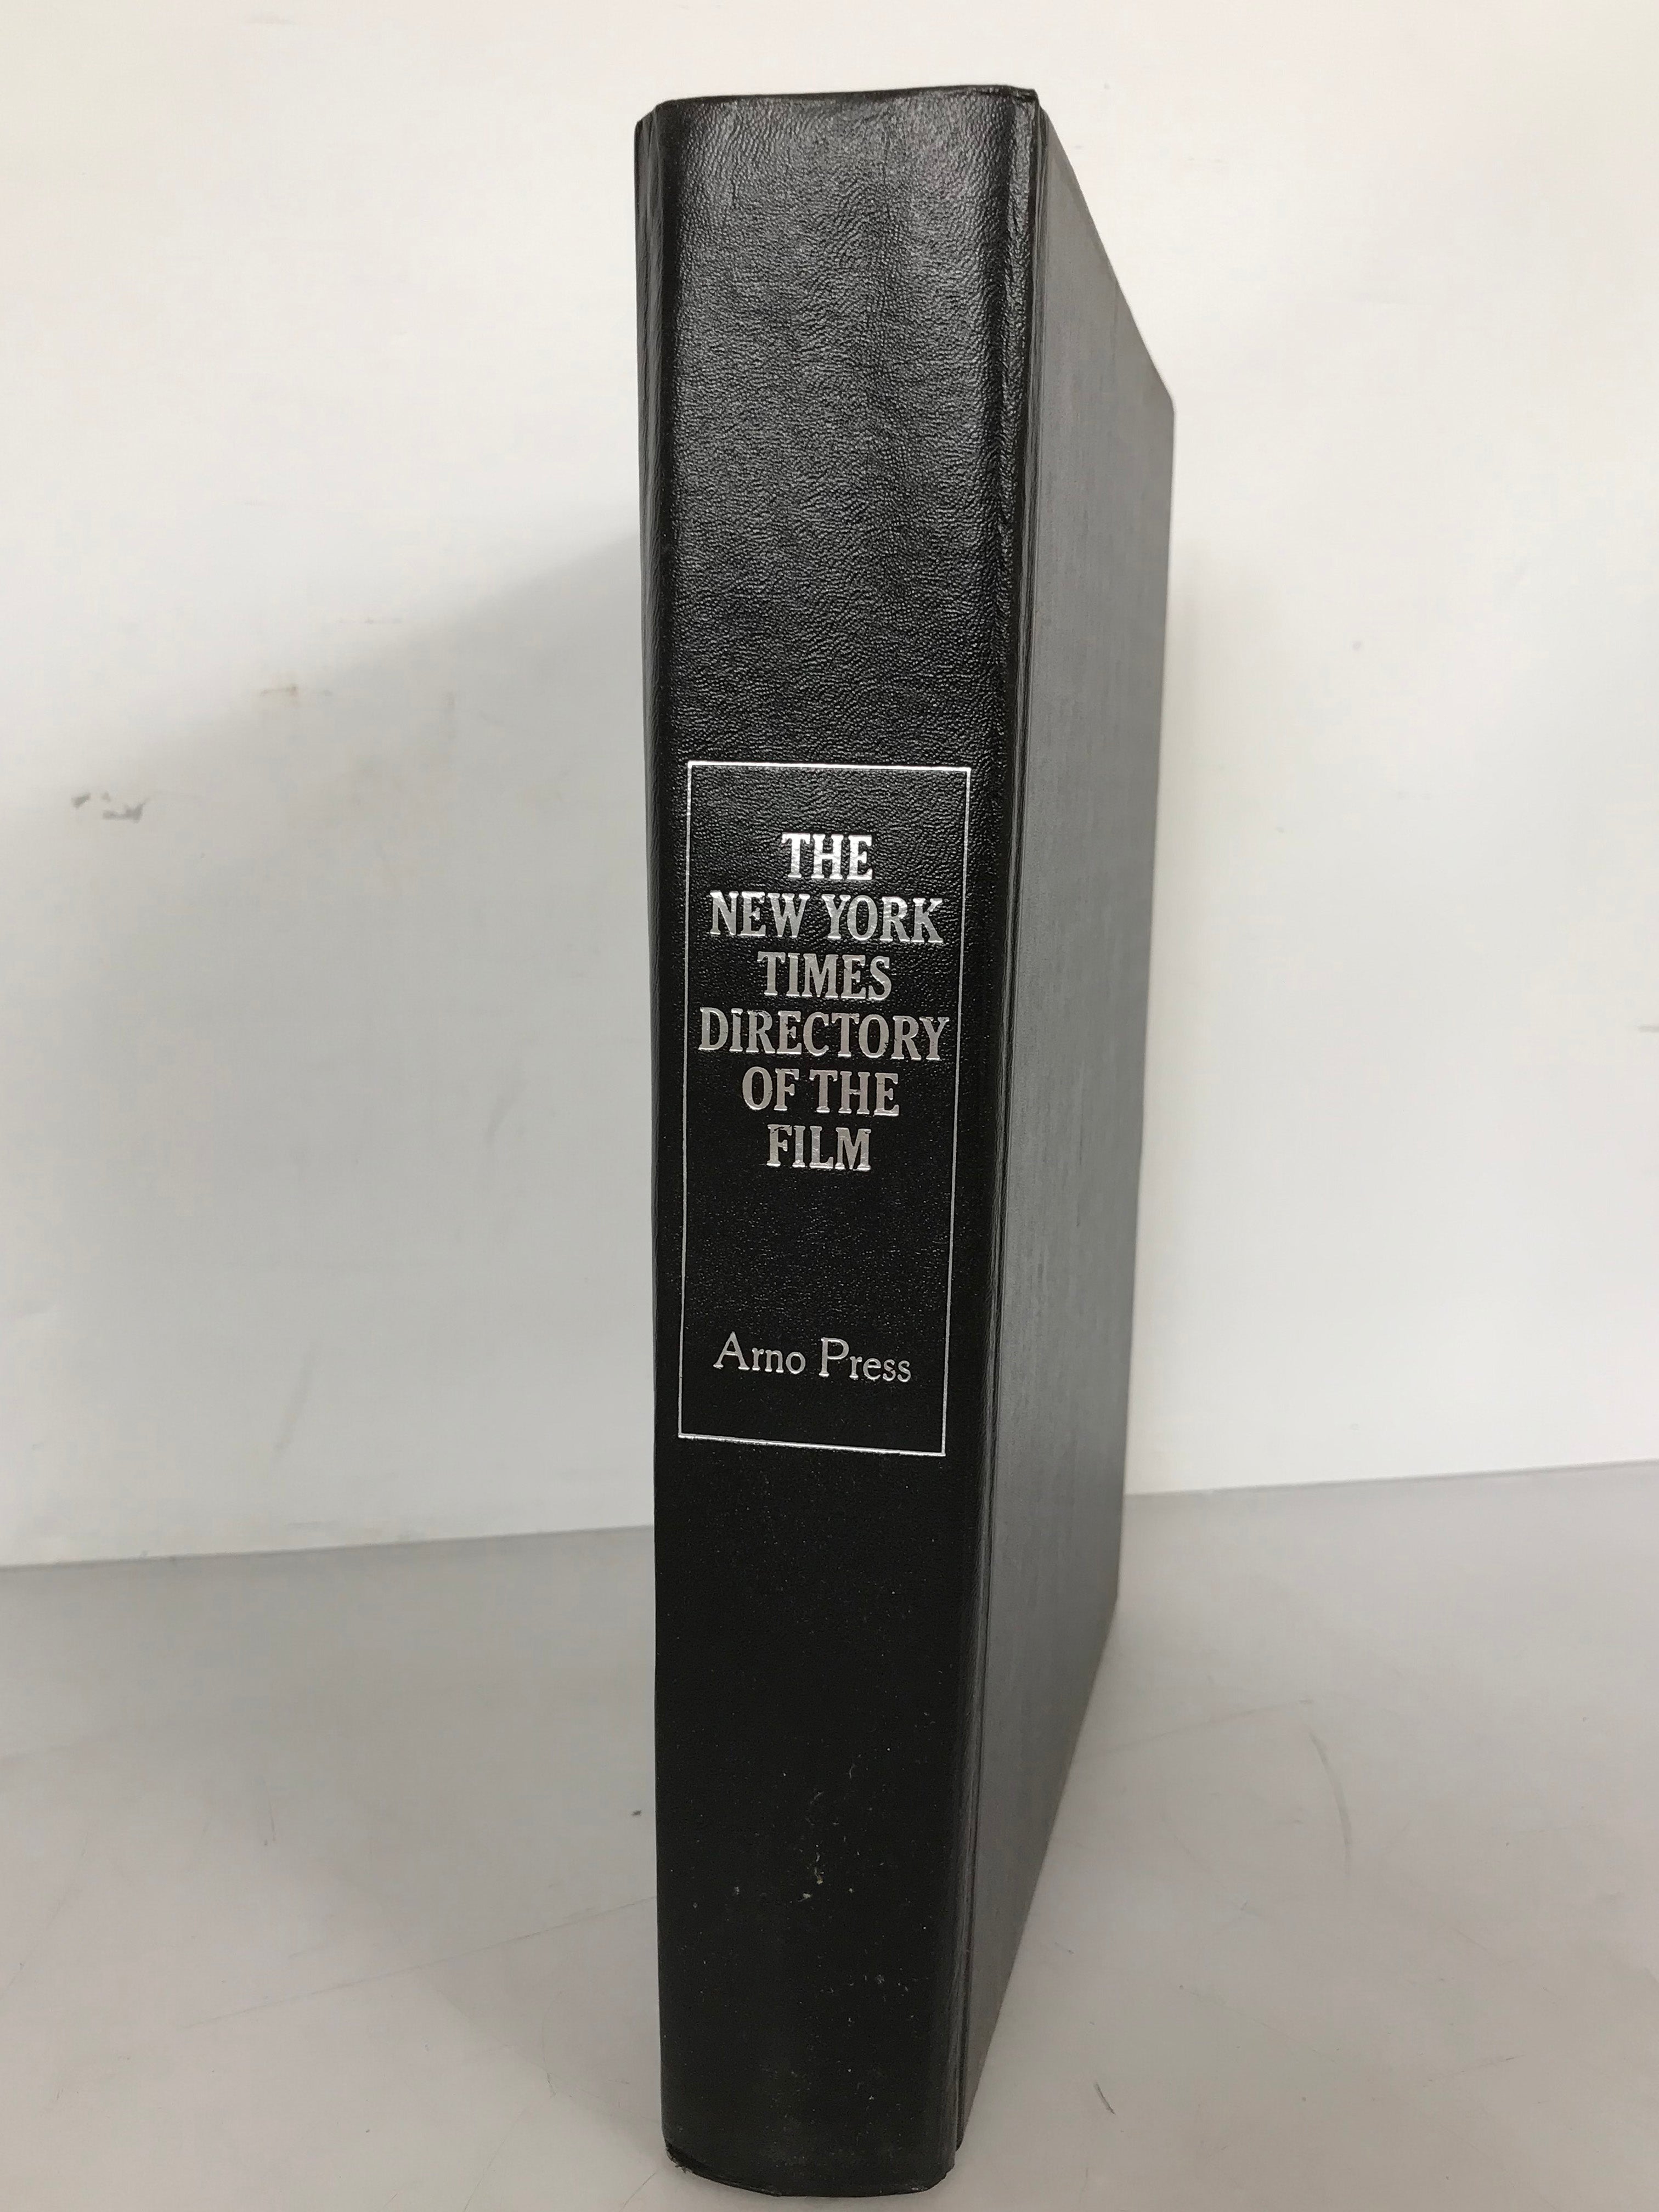 The New York Times Directory of Film Abridged Edition 1974